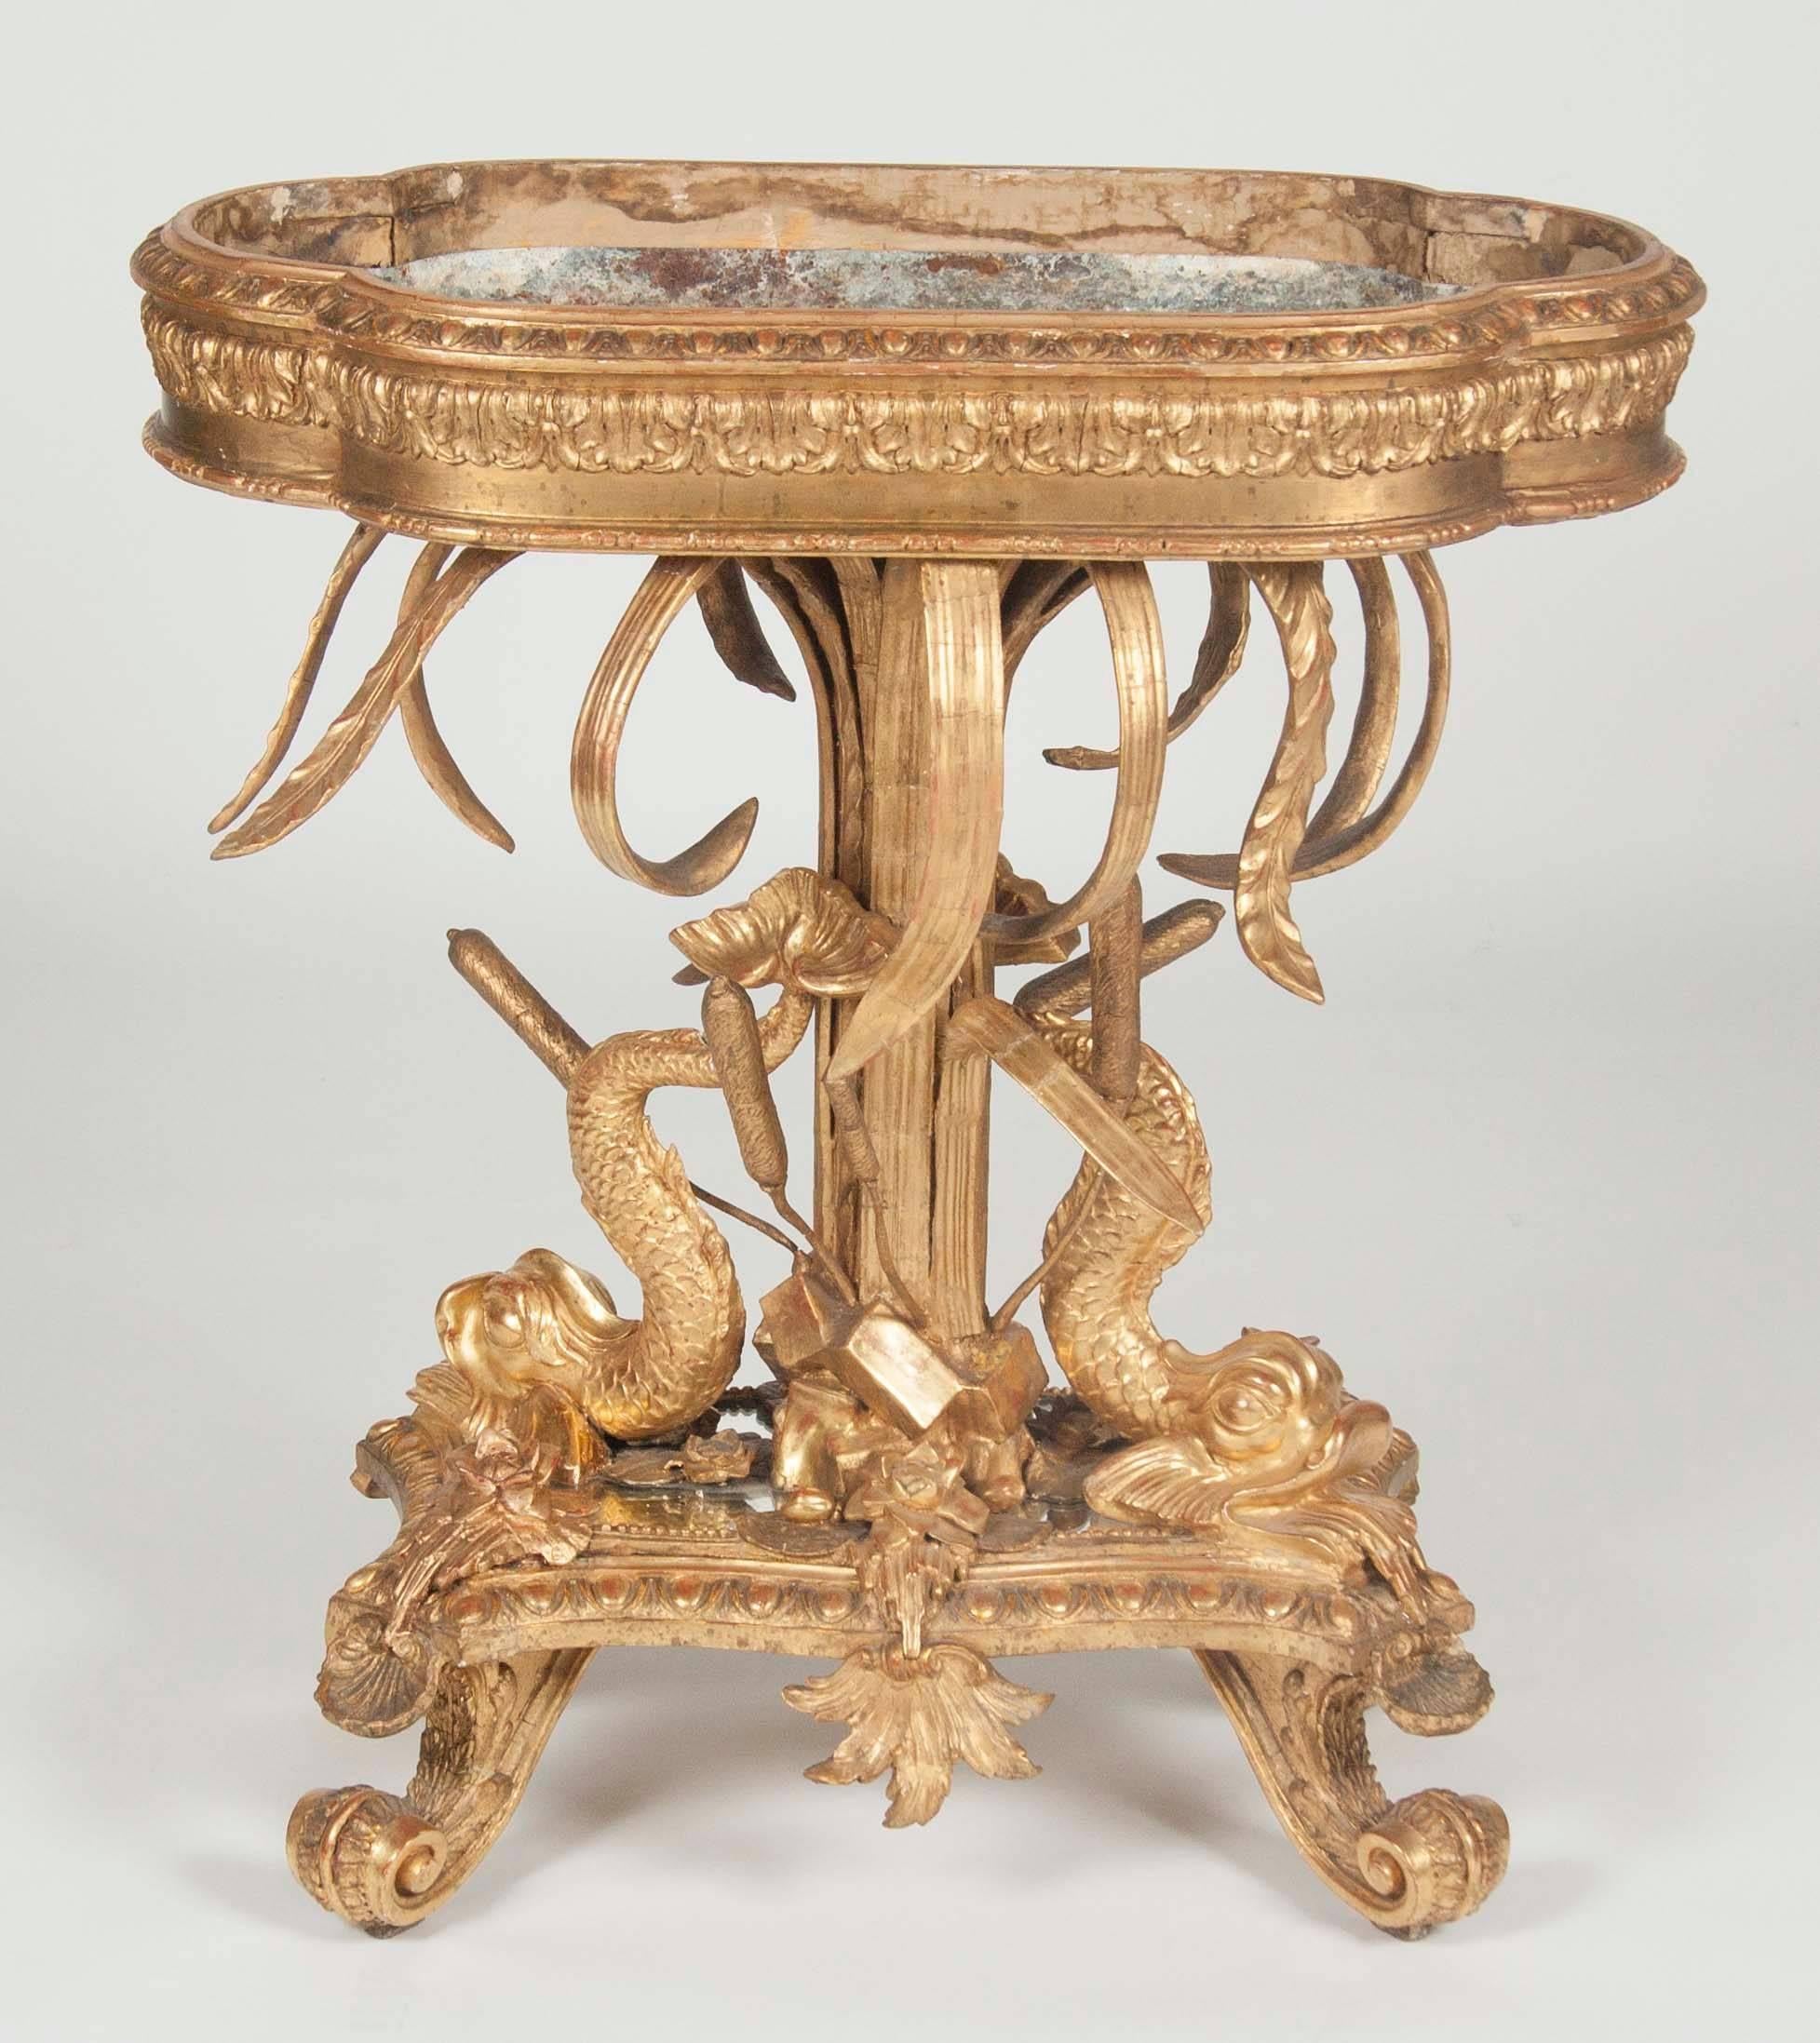 An Italian Belle Époque giltwood jardiniere with liner. For a similar form jardiniere please see Page 149, 